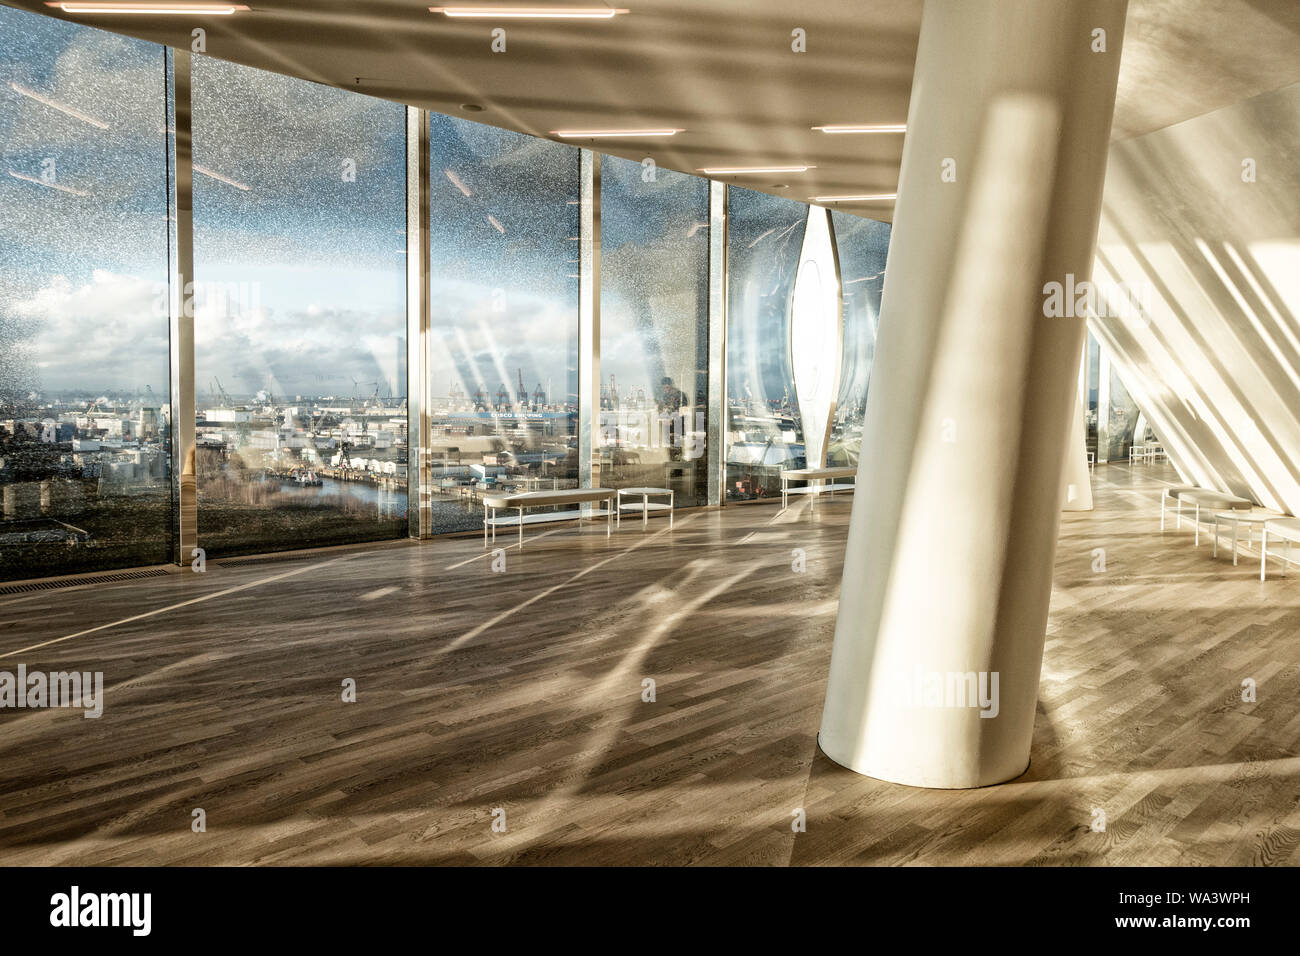 Indise view of Elbphilharmonie Hamburg with panoramic view on the Hamburg harbour through glass facade Stock Photo